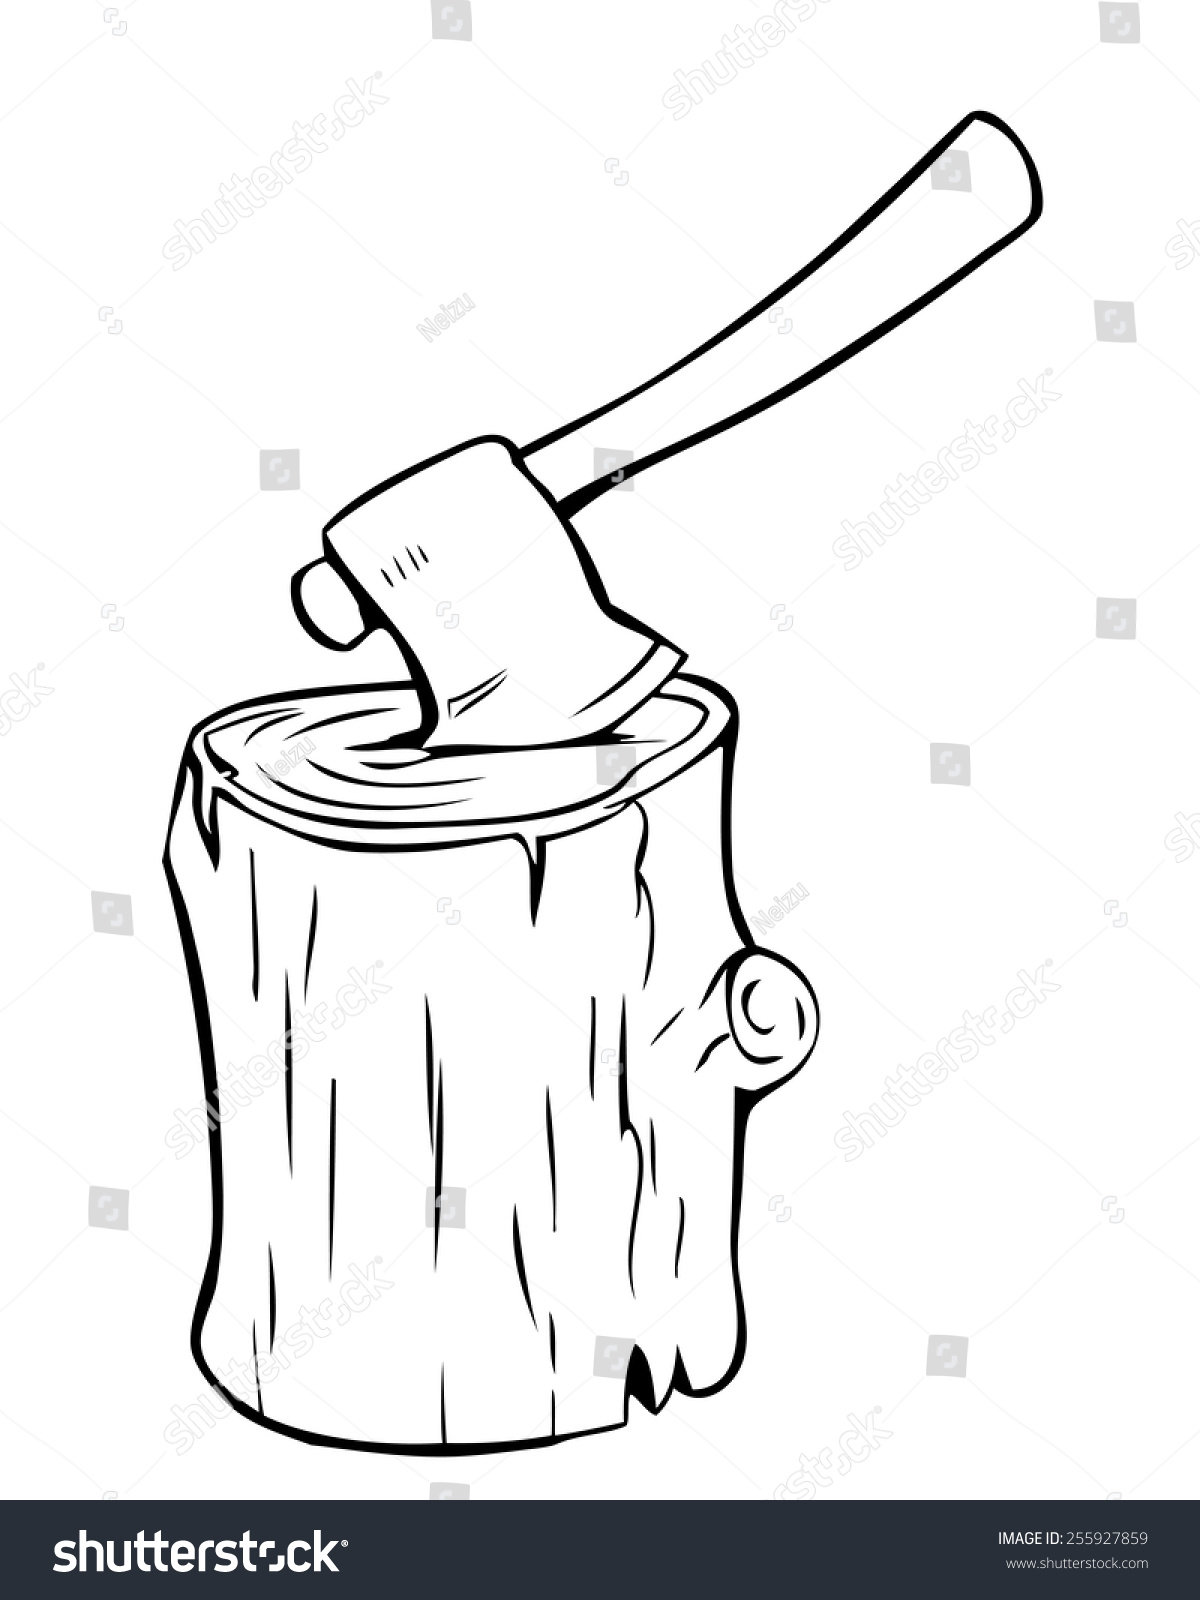 Vector Illustration Of Axe In A Stump Chopping Wood - 255927859 ...